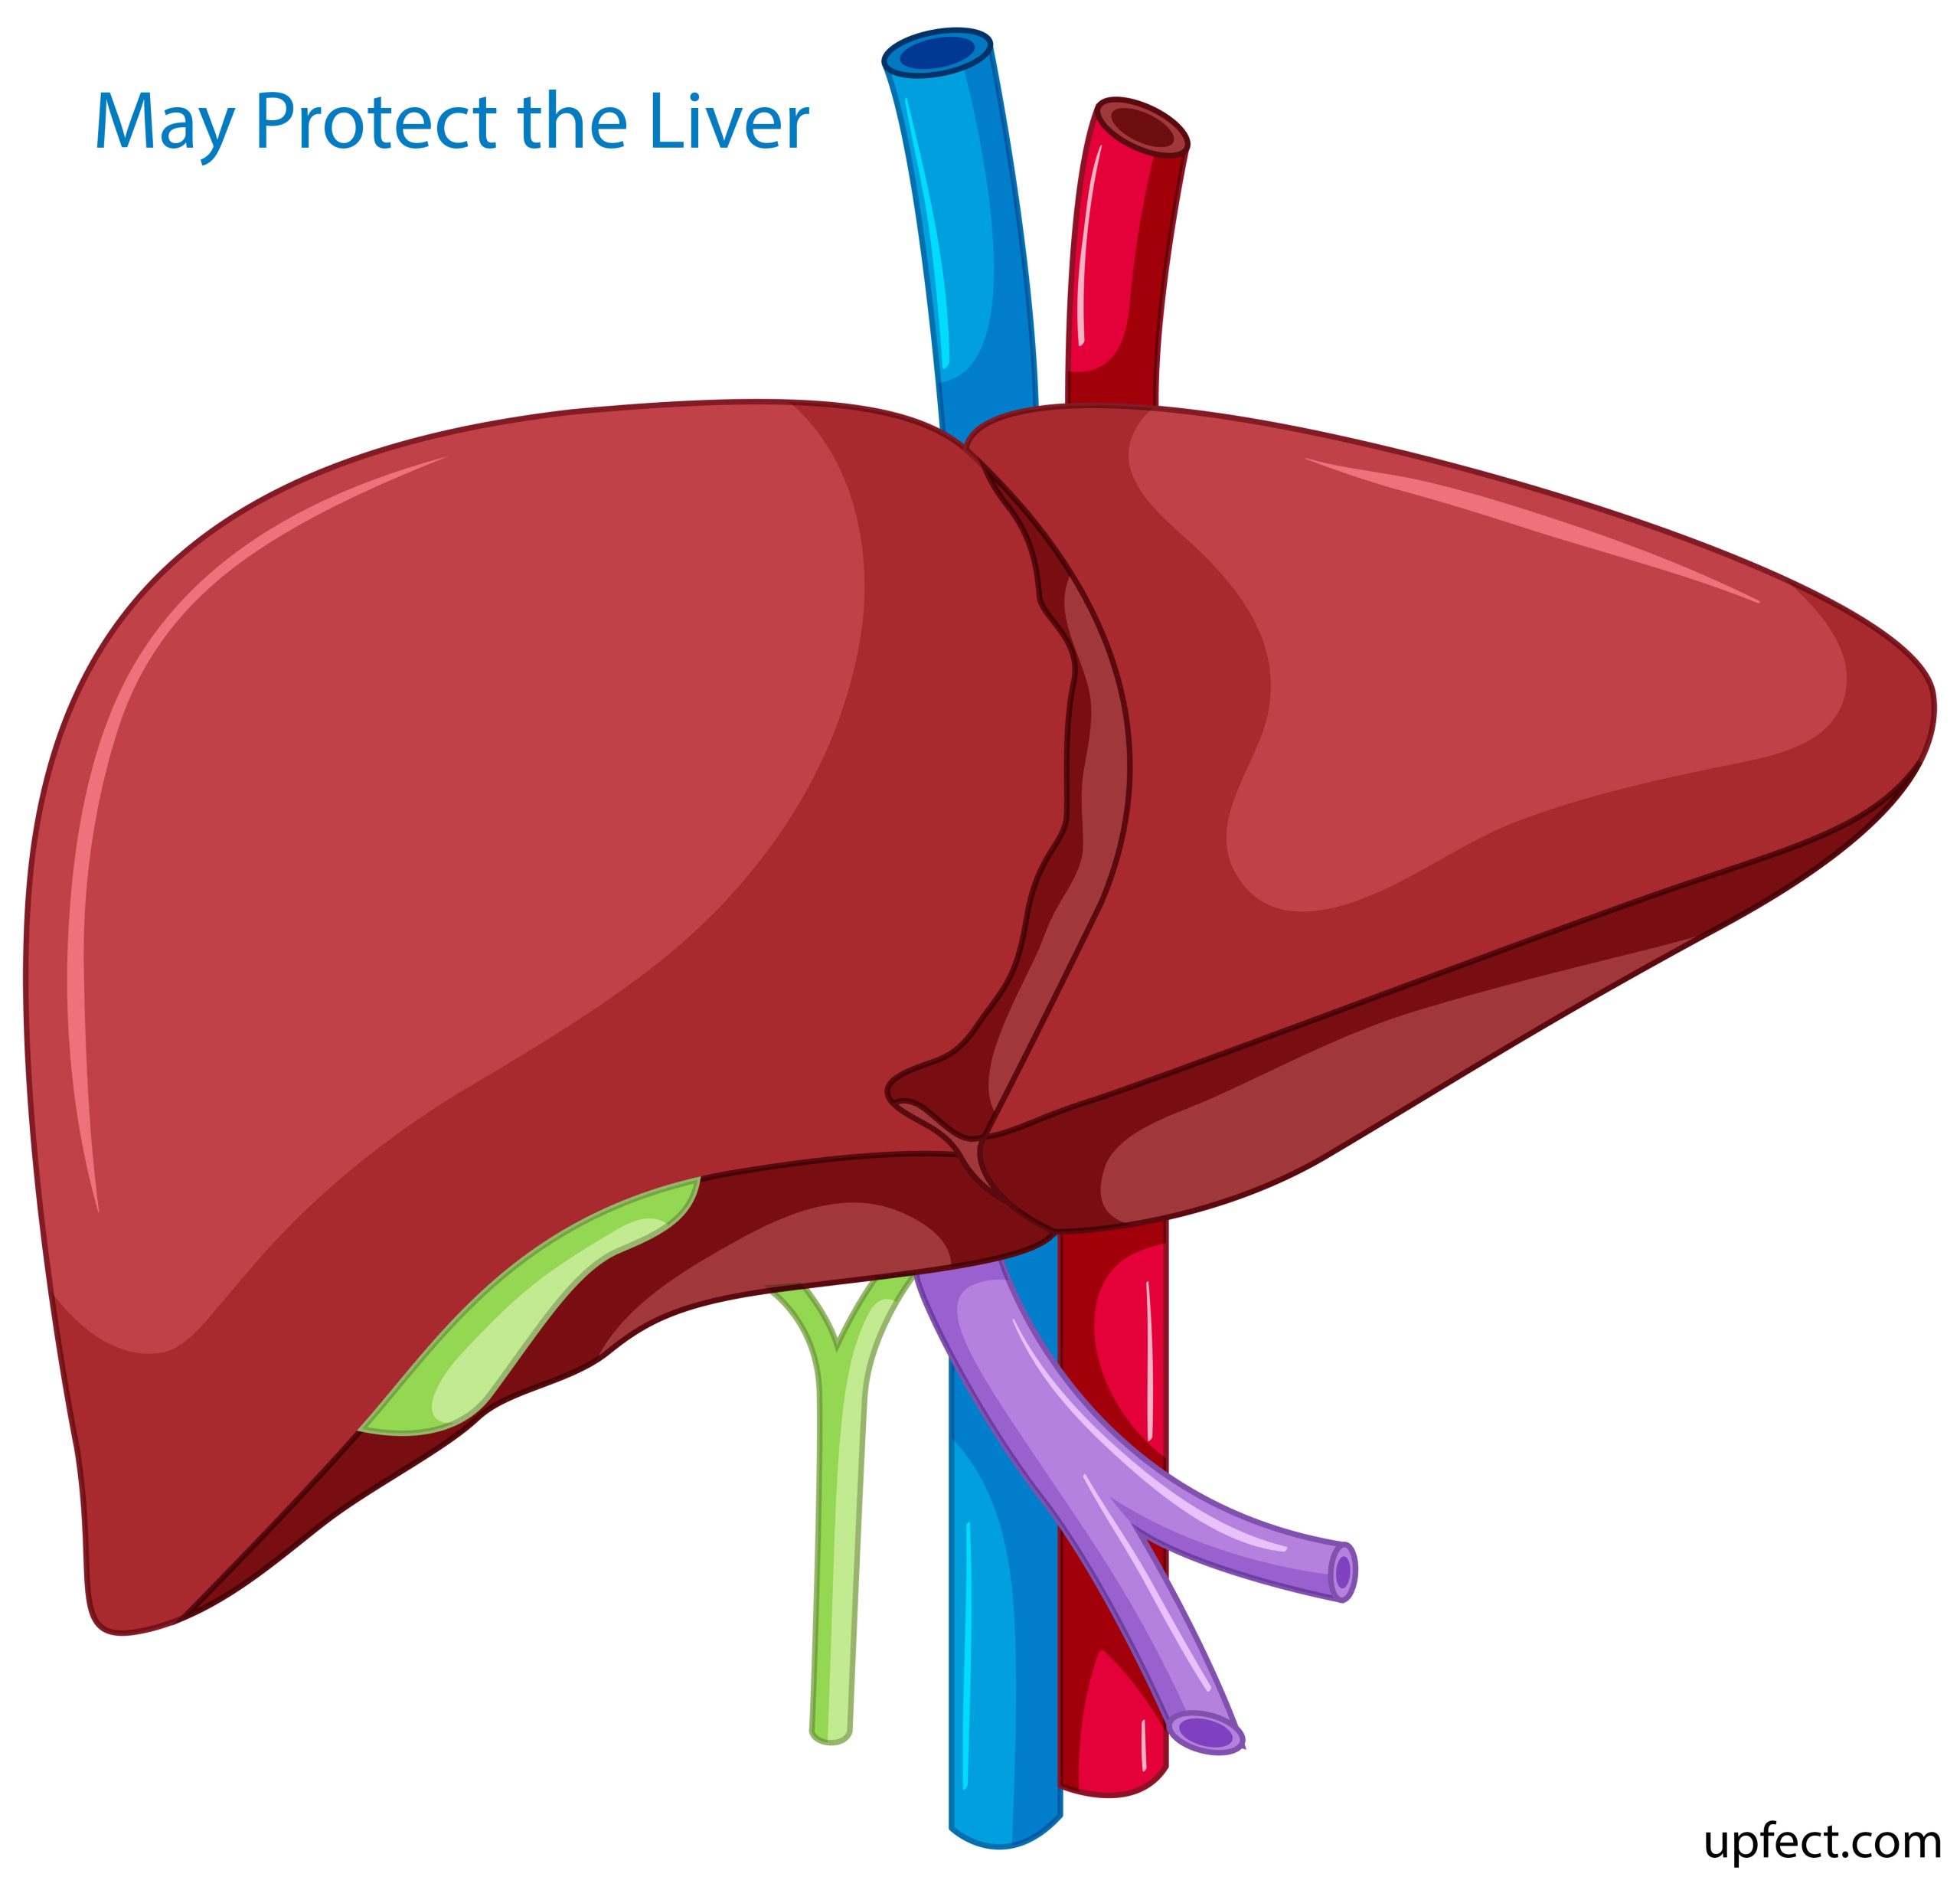 May Protect the Liver